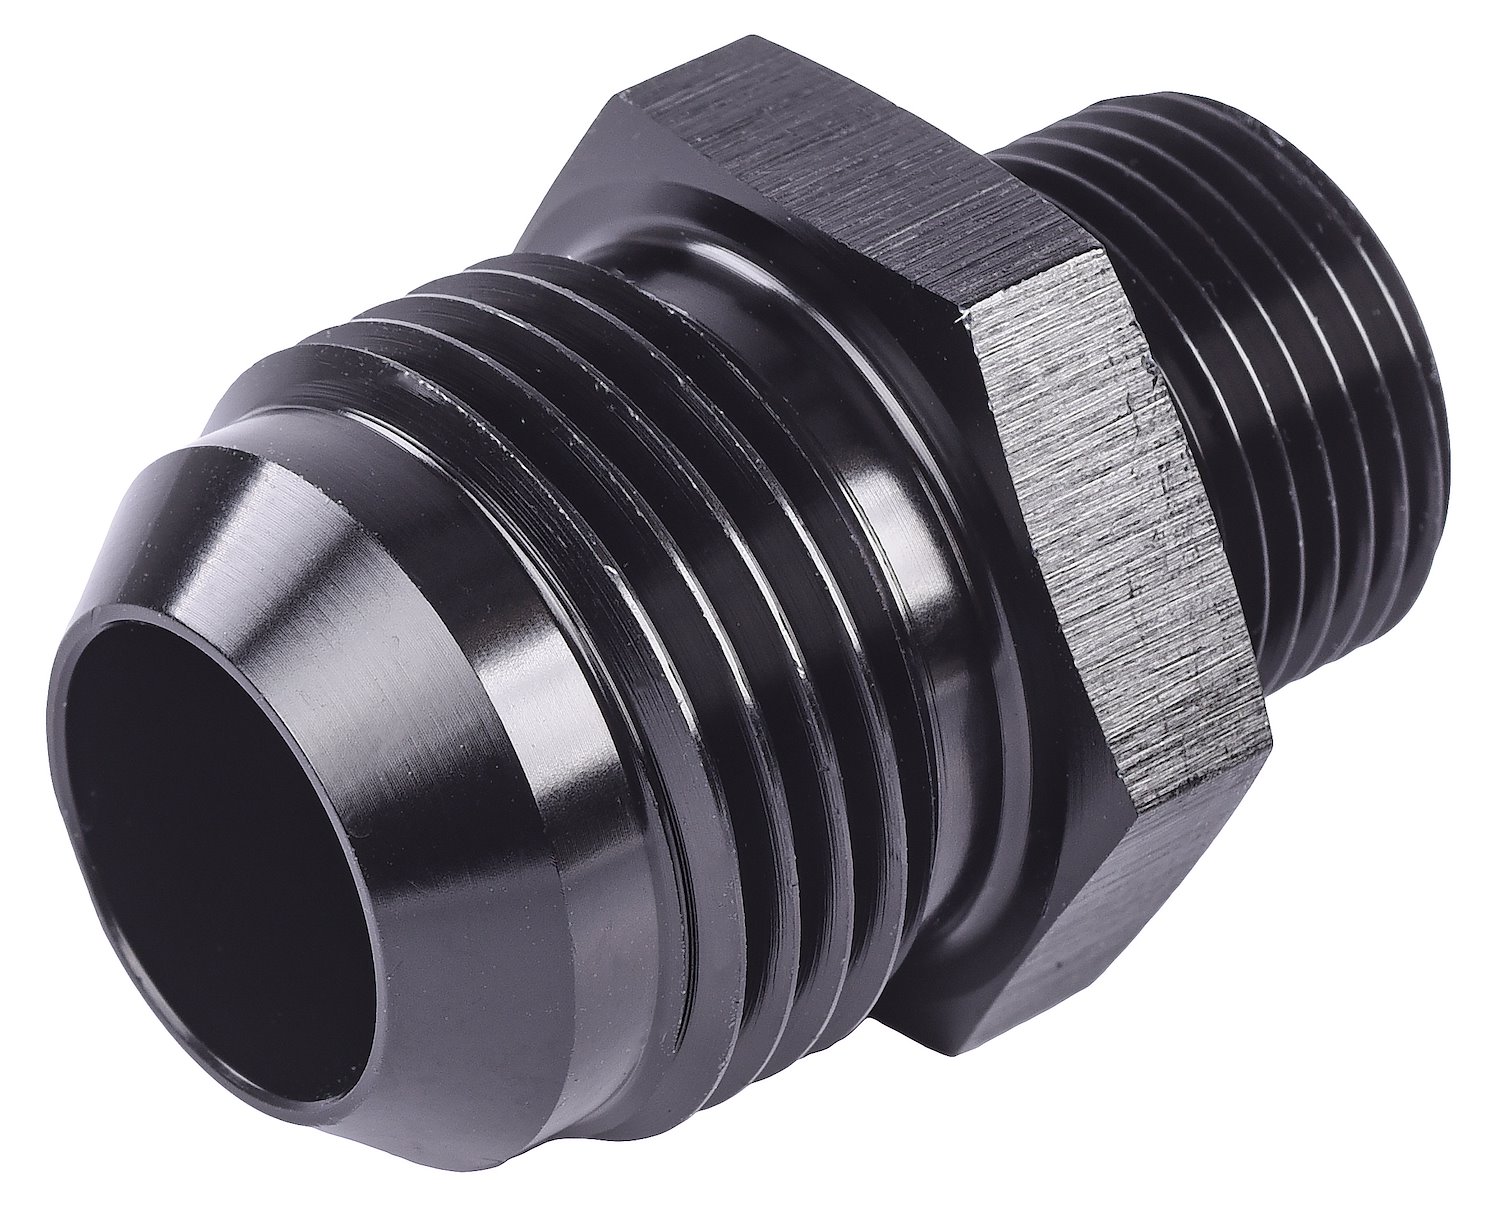 AN to Metric Adapter Fitting [-12 AN Male to 20mm x 1.5 Male]